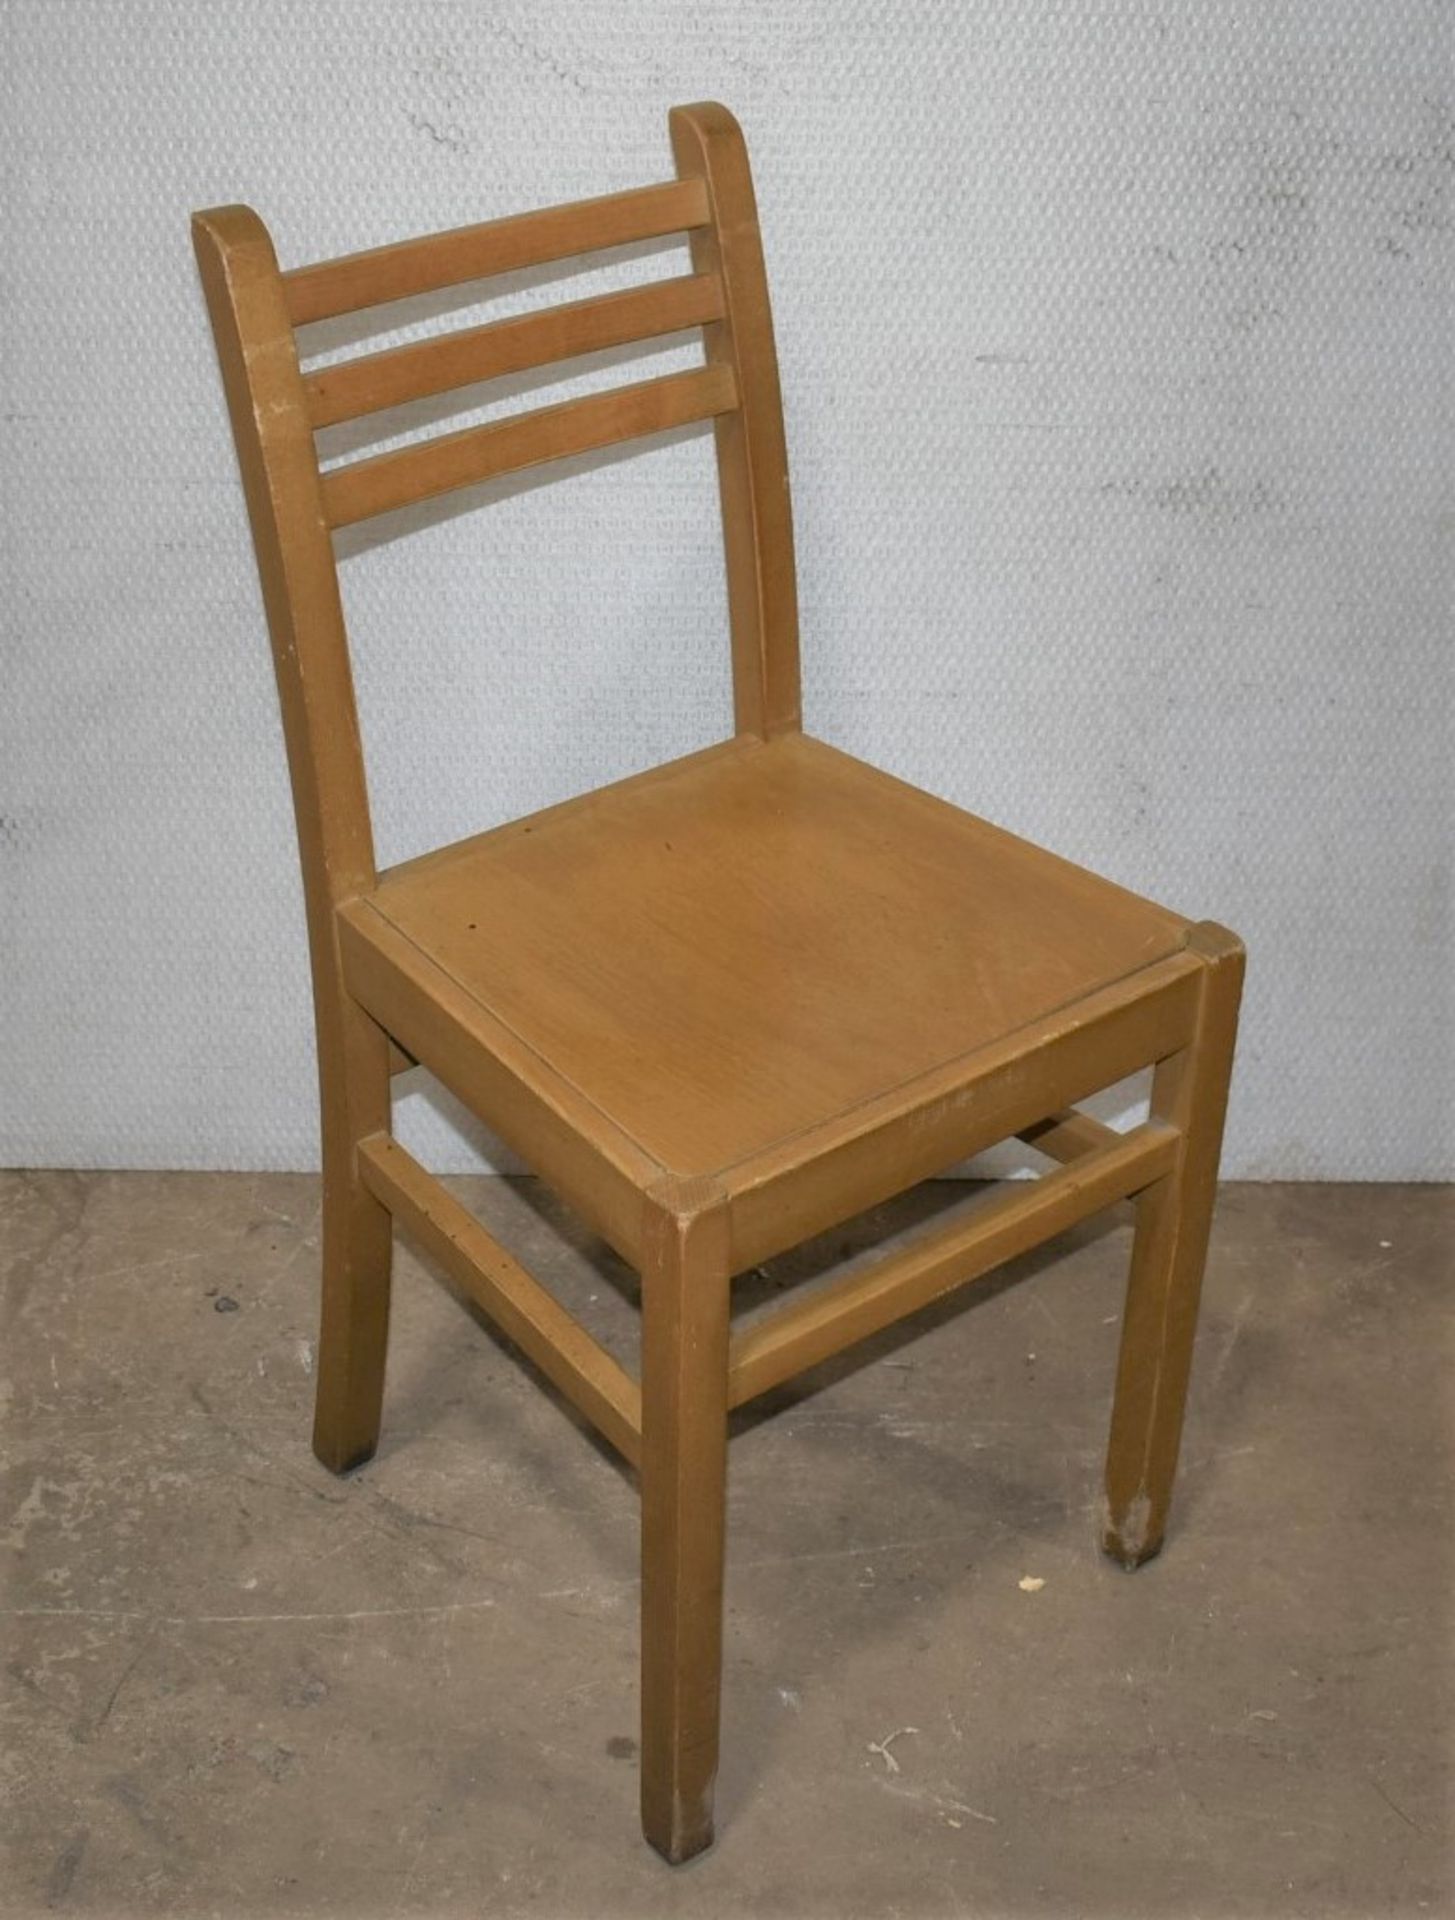 8 x Restaurant Dining Chairs With a Light Wood Finish - Image 5 of 5